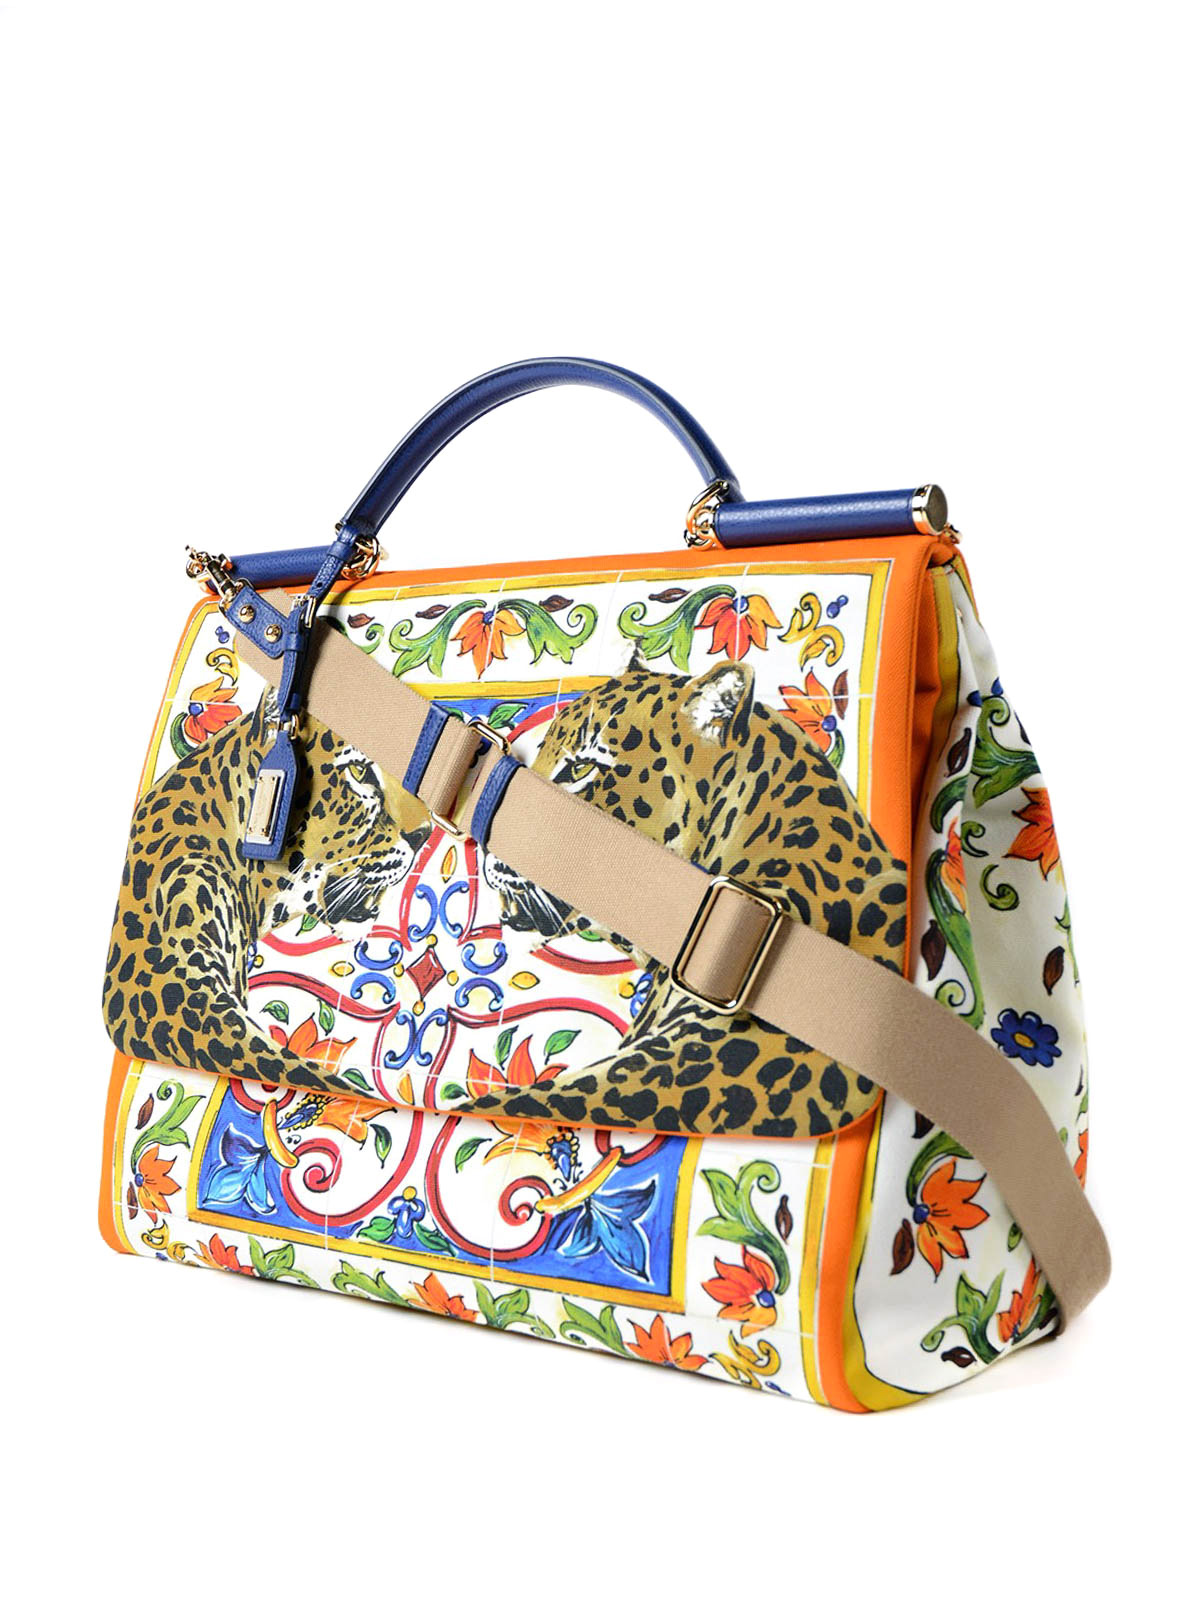 dolce--gabbana-online-totes-bags-sicily-